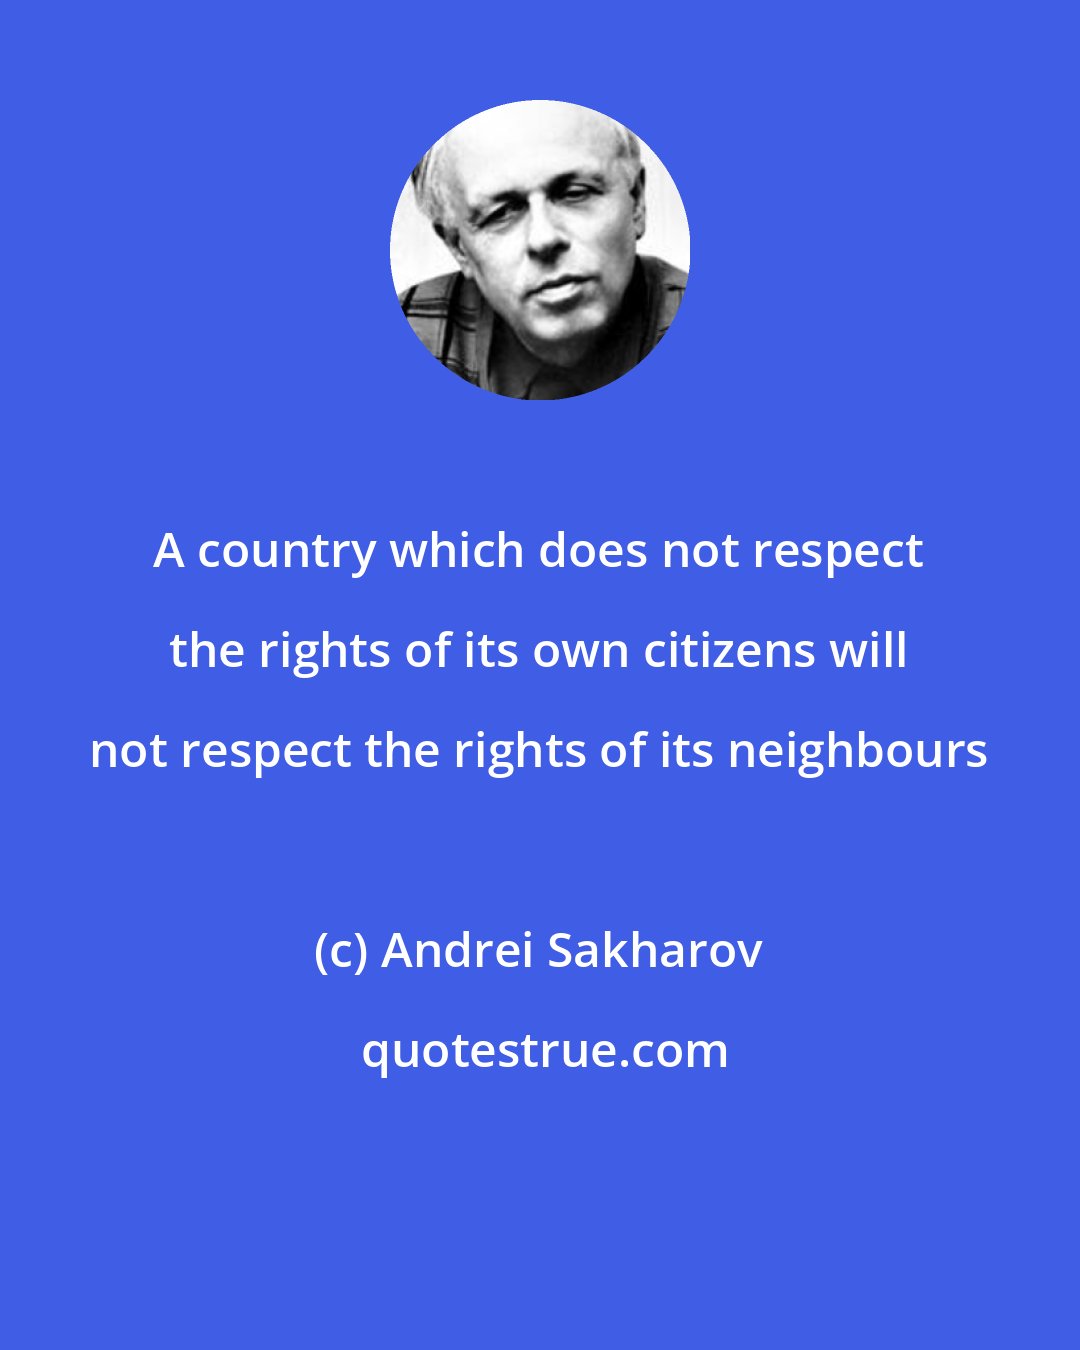 Andrei Sakharov: A country which does not respect the rights of its own citizens will not respect the rights of its neighbours